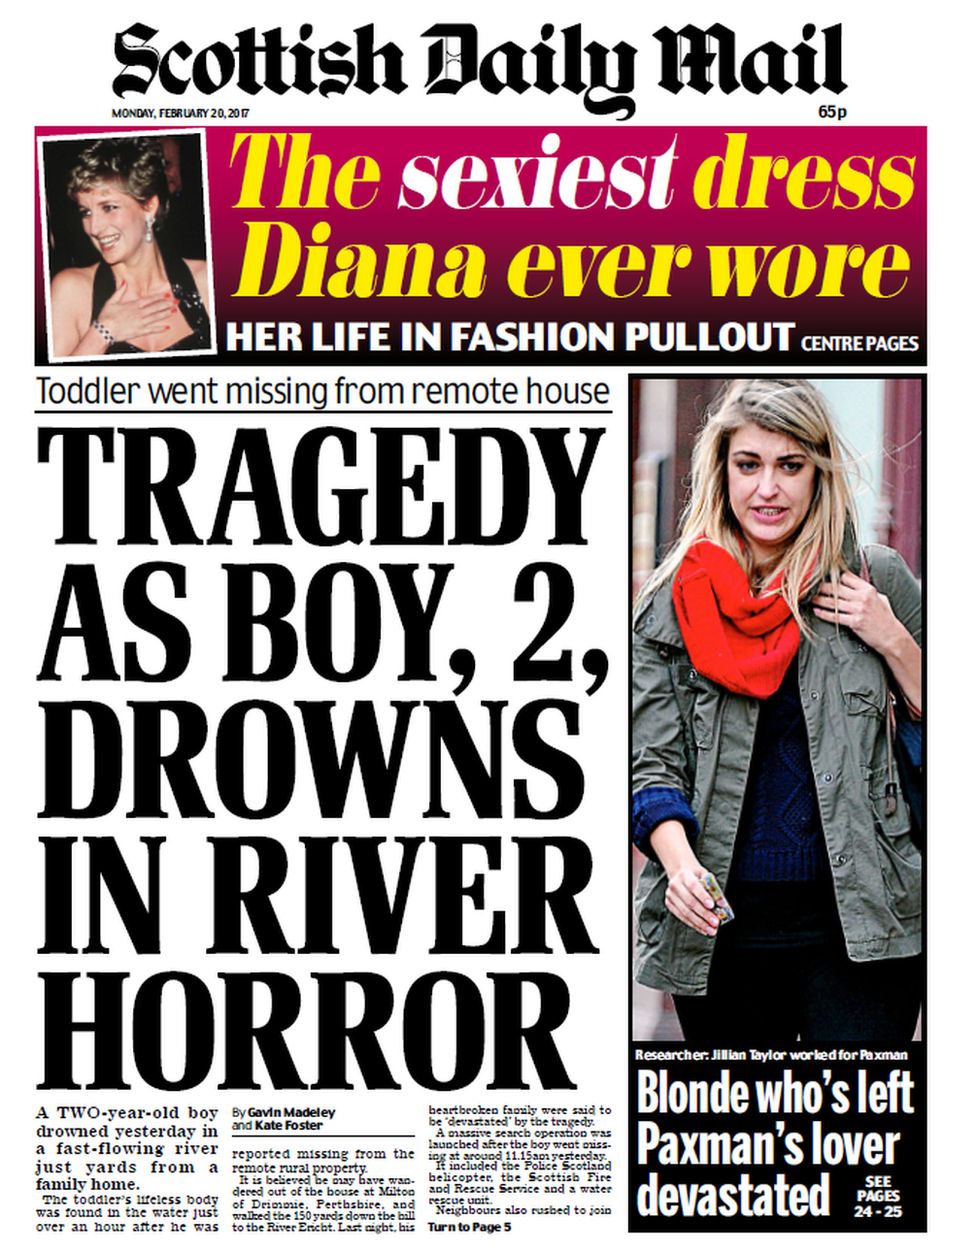 Scotland's papers: River tragedy and cancer 'survival gap' - BBC News